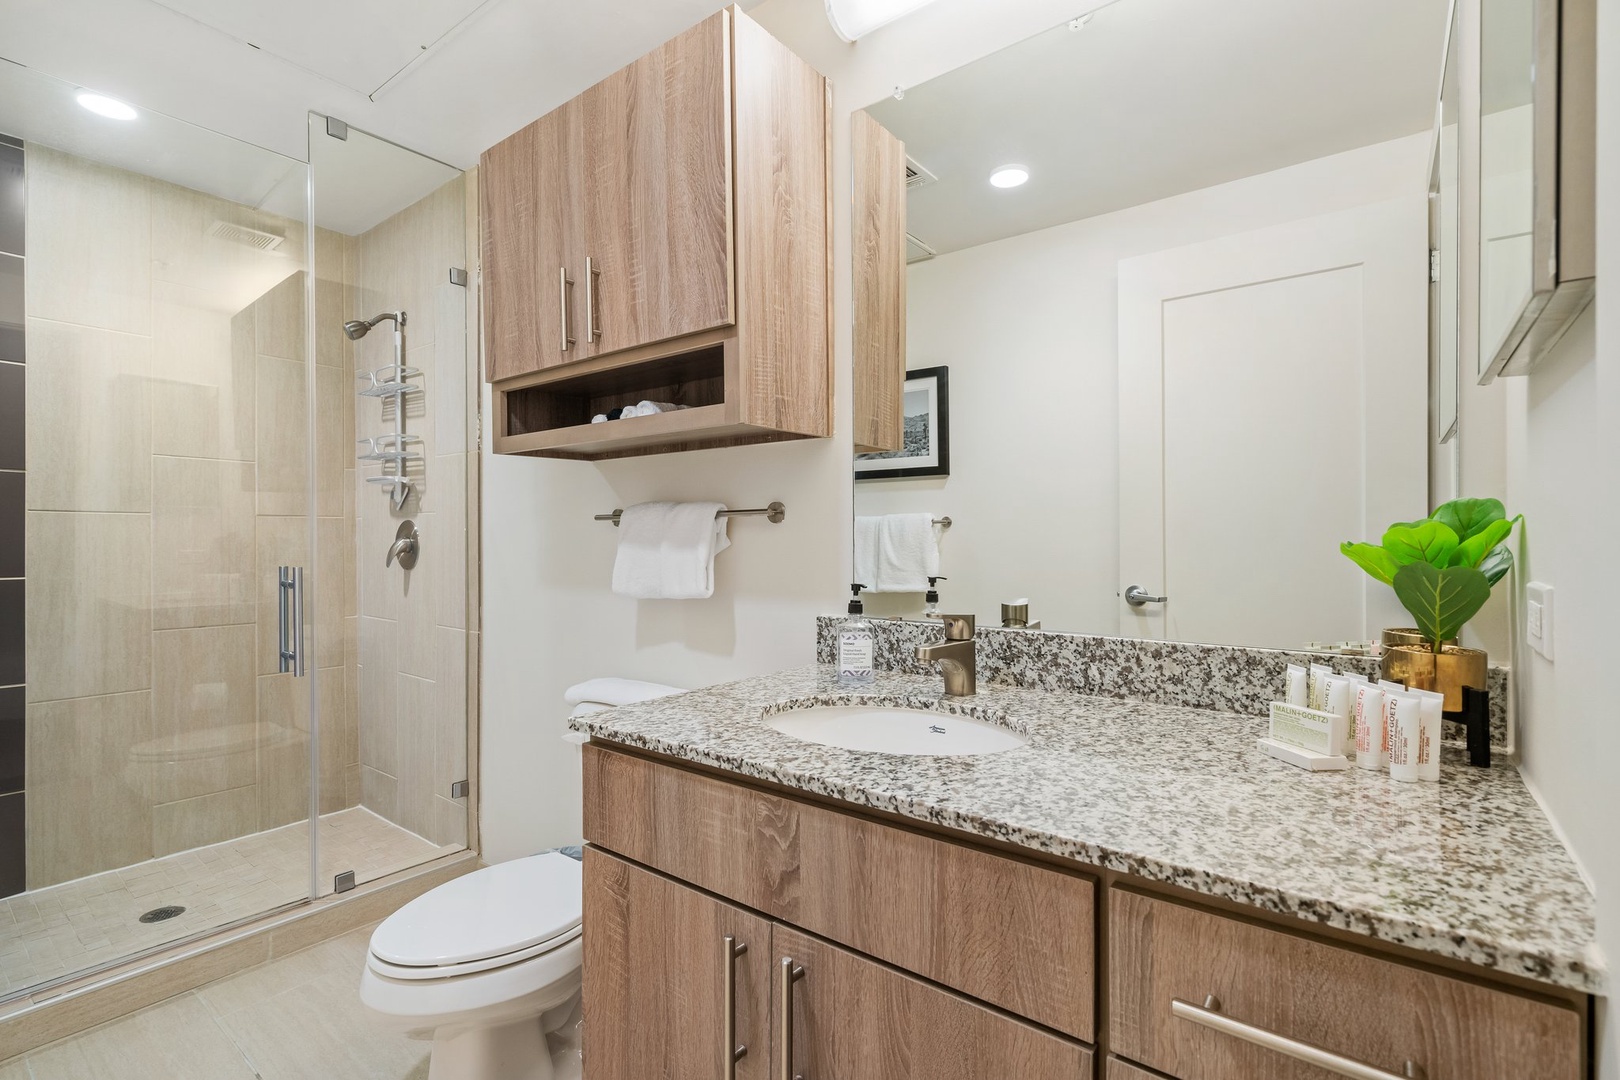 Freshen up in the sleek bathroom with complimentary toiletries.